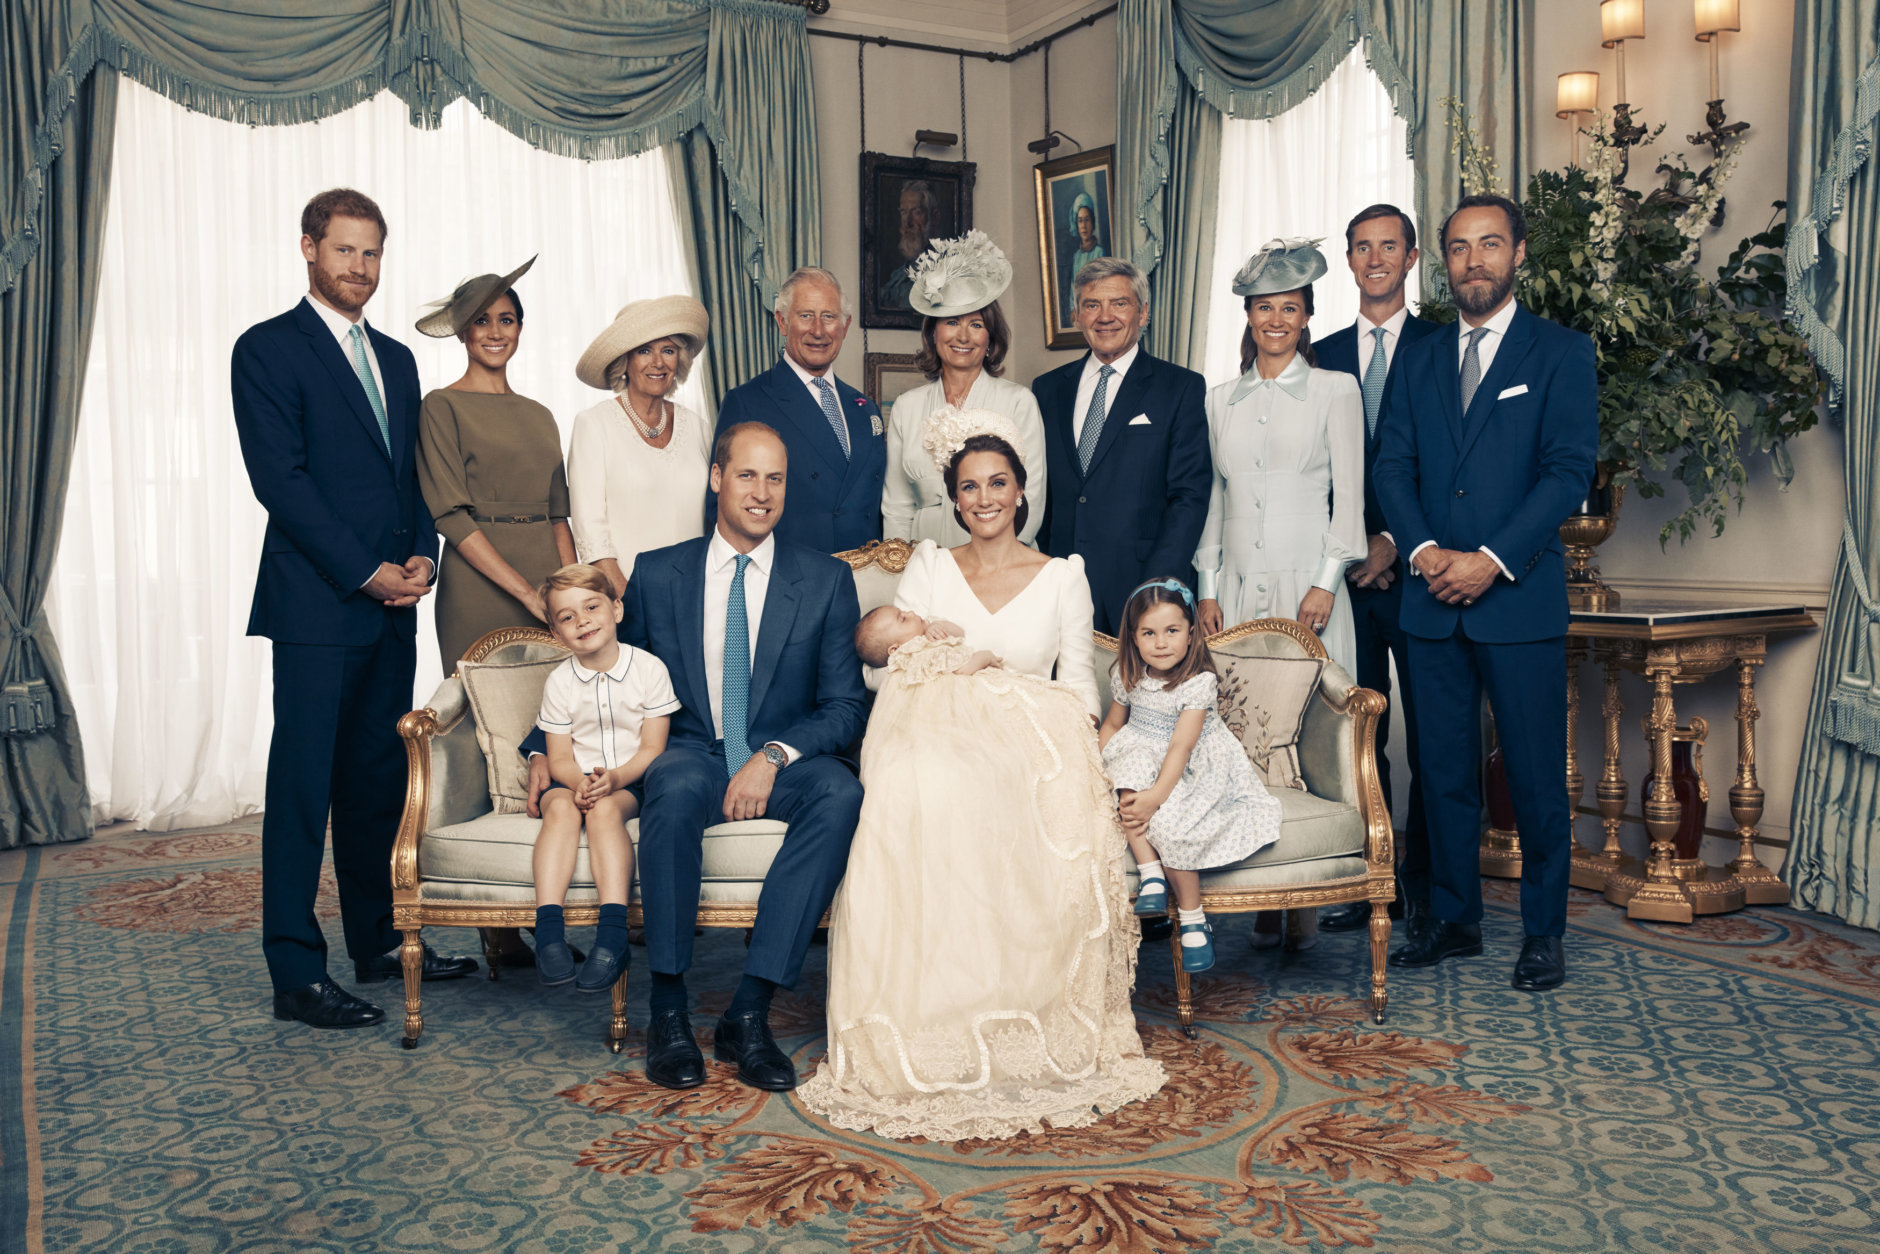 This Monday, July 9, 2018, photo provided by the Duke and Duchess of Cambridge shows the official photograph to mark the christening of Prince Louis at Clarence House, following Prince Louis' baptism, in London. Seated, left to right: Prince George, Prince William, the Duke of Cambridge; Prince Louis; Kate, the Duchess of Cambridge; and Princess Charlotte. Standing, left to right: Prince Harry, The Duke of Sussex; Megan, the Duchess of Sussex; Camilla, the Duchess of Cornwall; Prince Charles, Prince of Wales; Carole Middleton, Michael Middleton, Pippa Matthews, James Matthews and James Middleton. (Matt Holyoak/Camera Press/Duke and Duchess of Cambridge via AP)